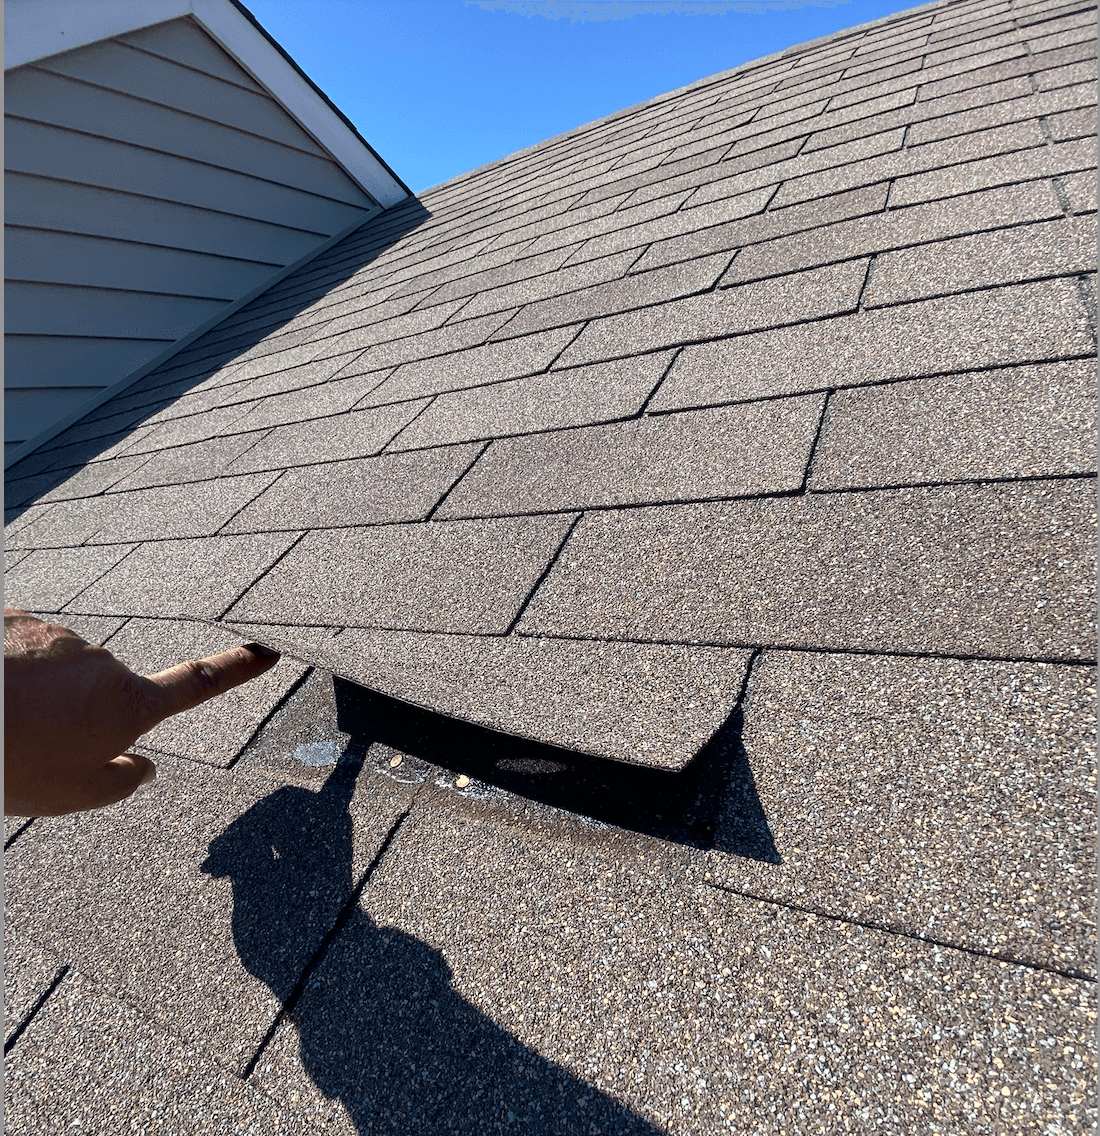 inspector noticing a loose shingle during a roof inspection in Bloomington IN 2022